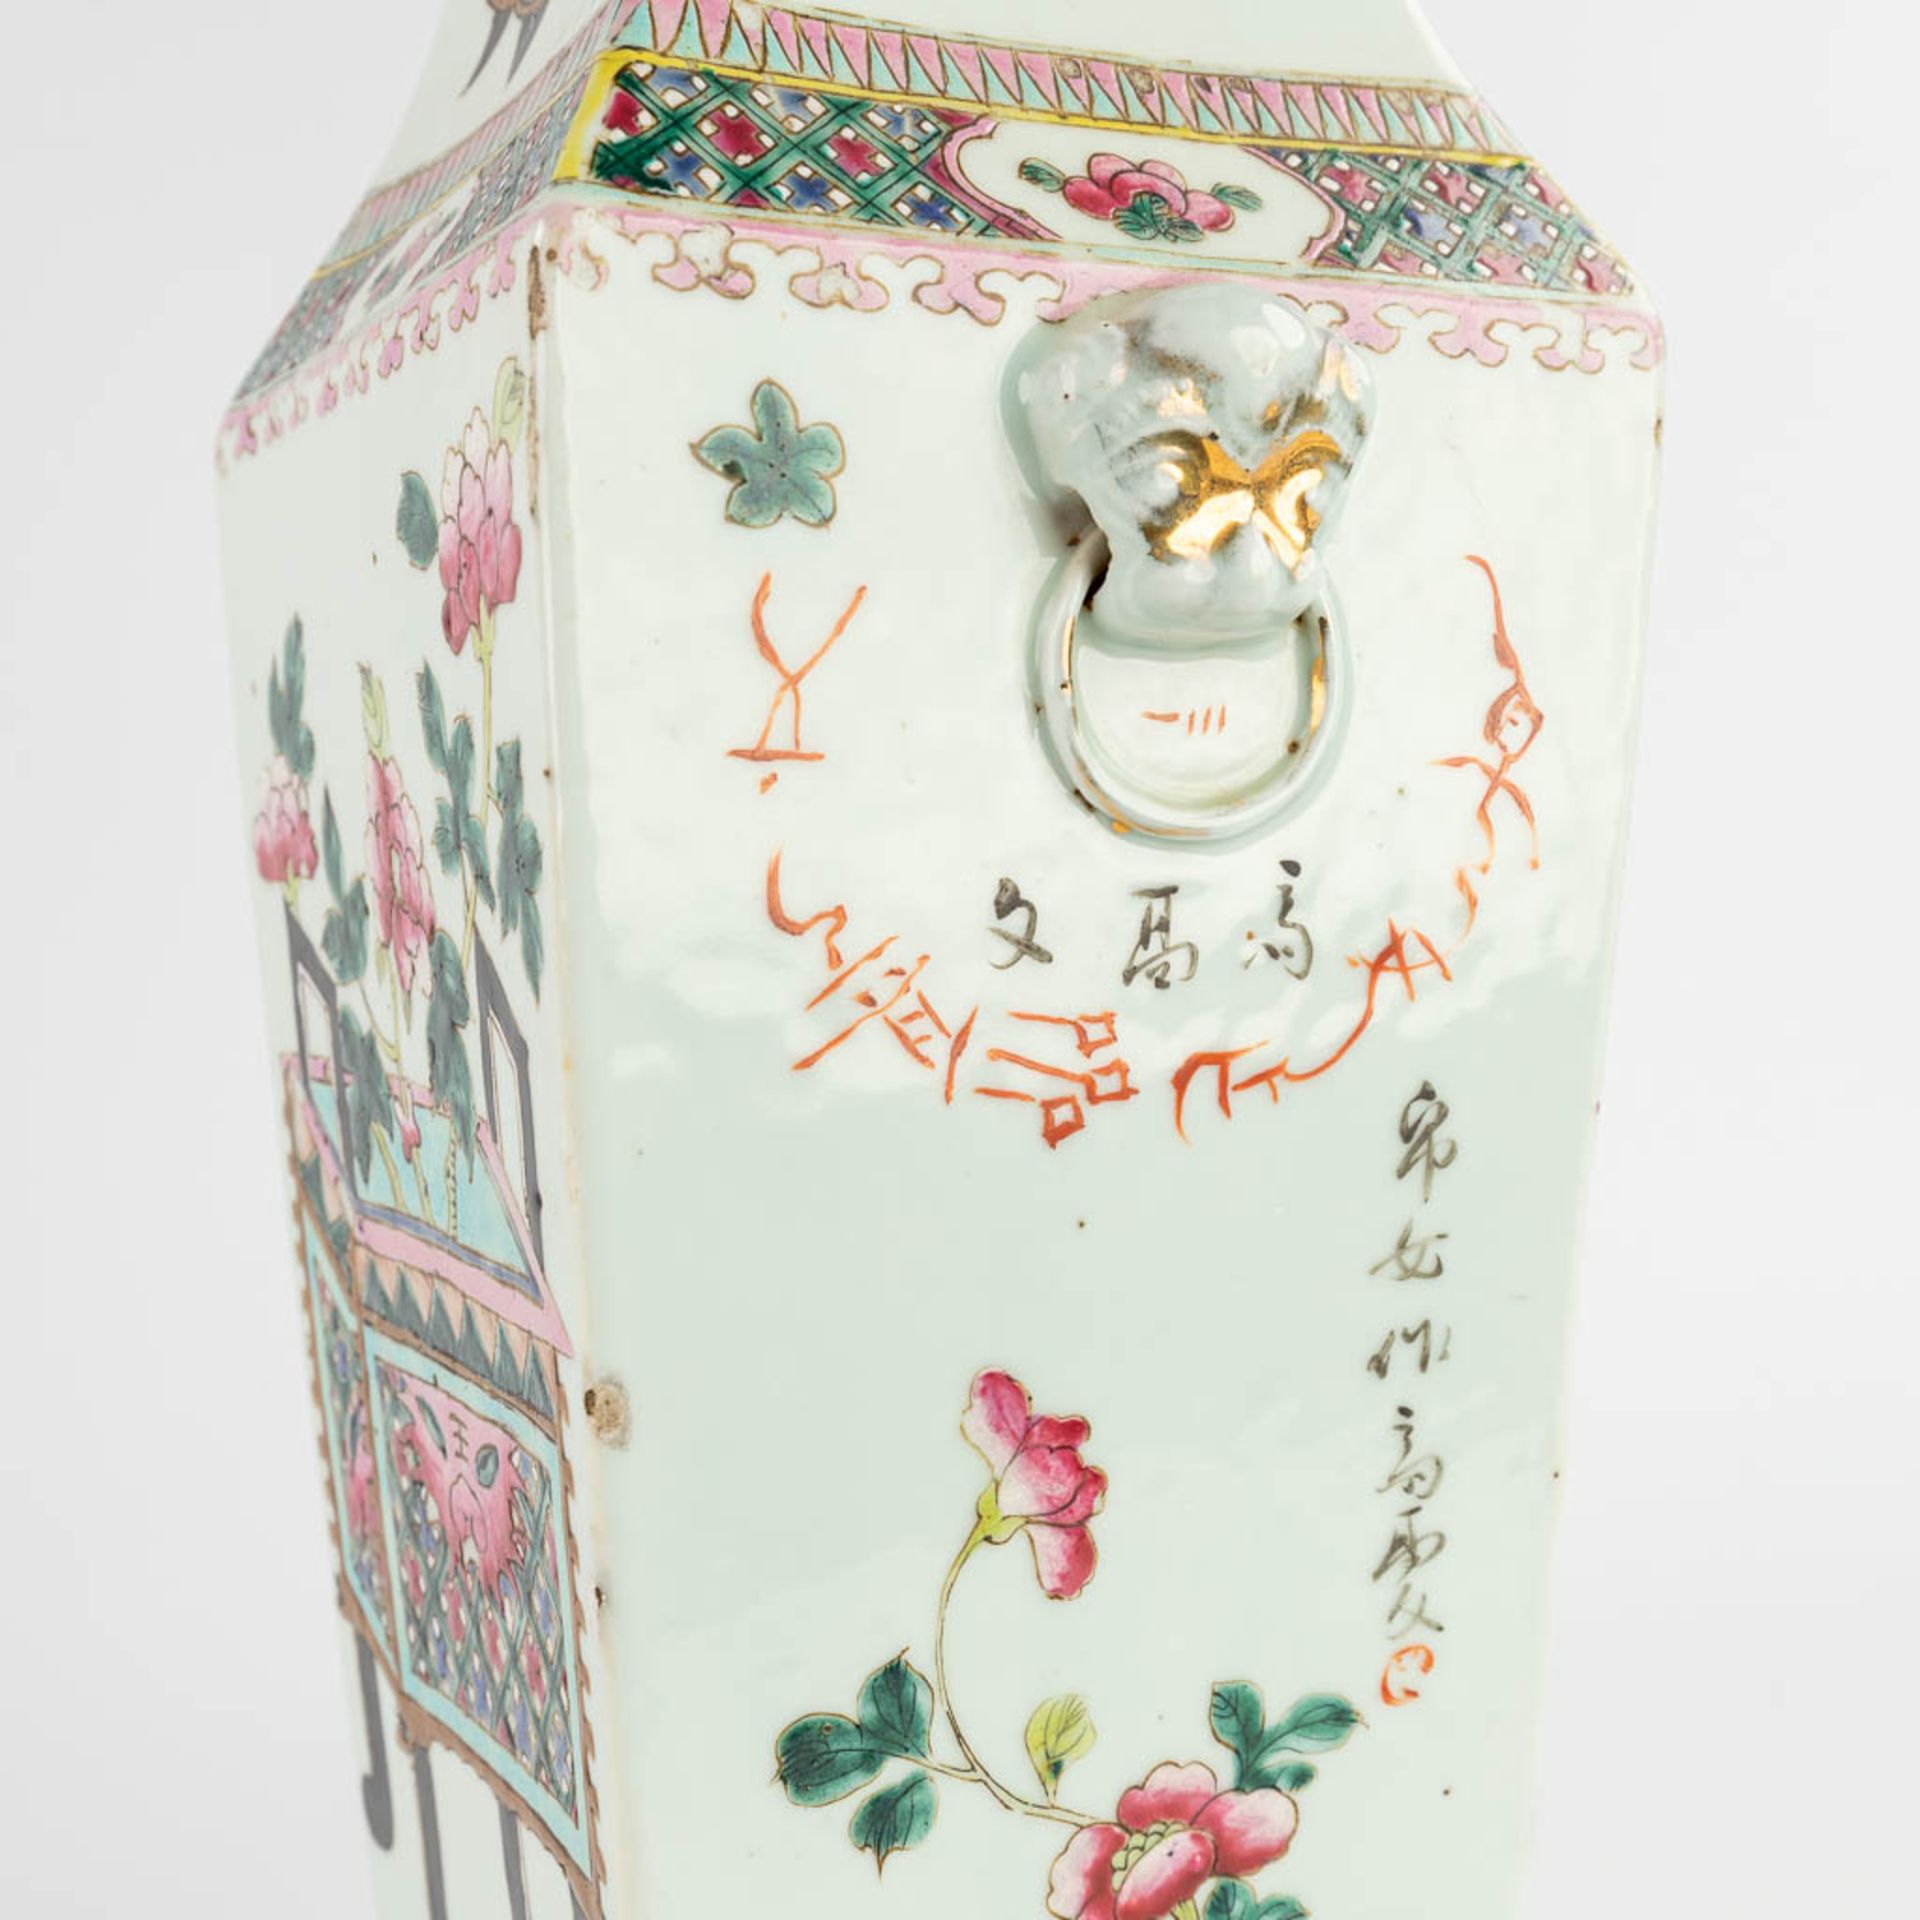 A square Chinese vase Famille Rose, decorated with flower vases. 19th C. (L:17 x W:14,5 x H:42 cm) - Image 11 of 15